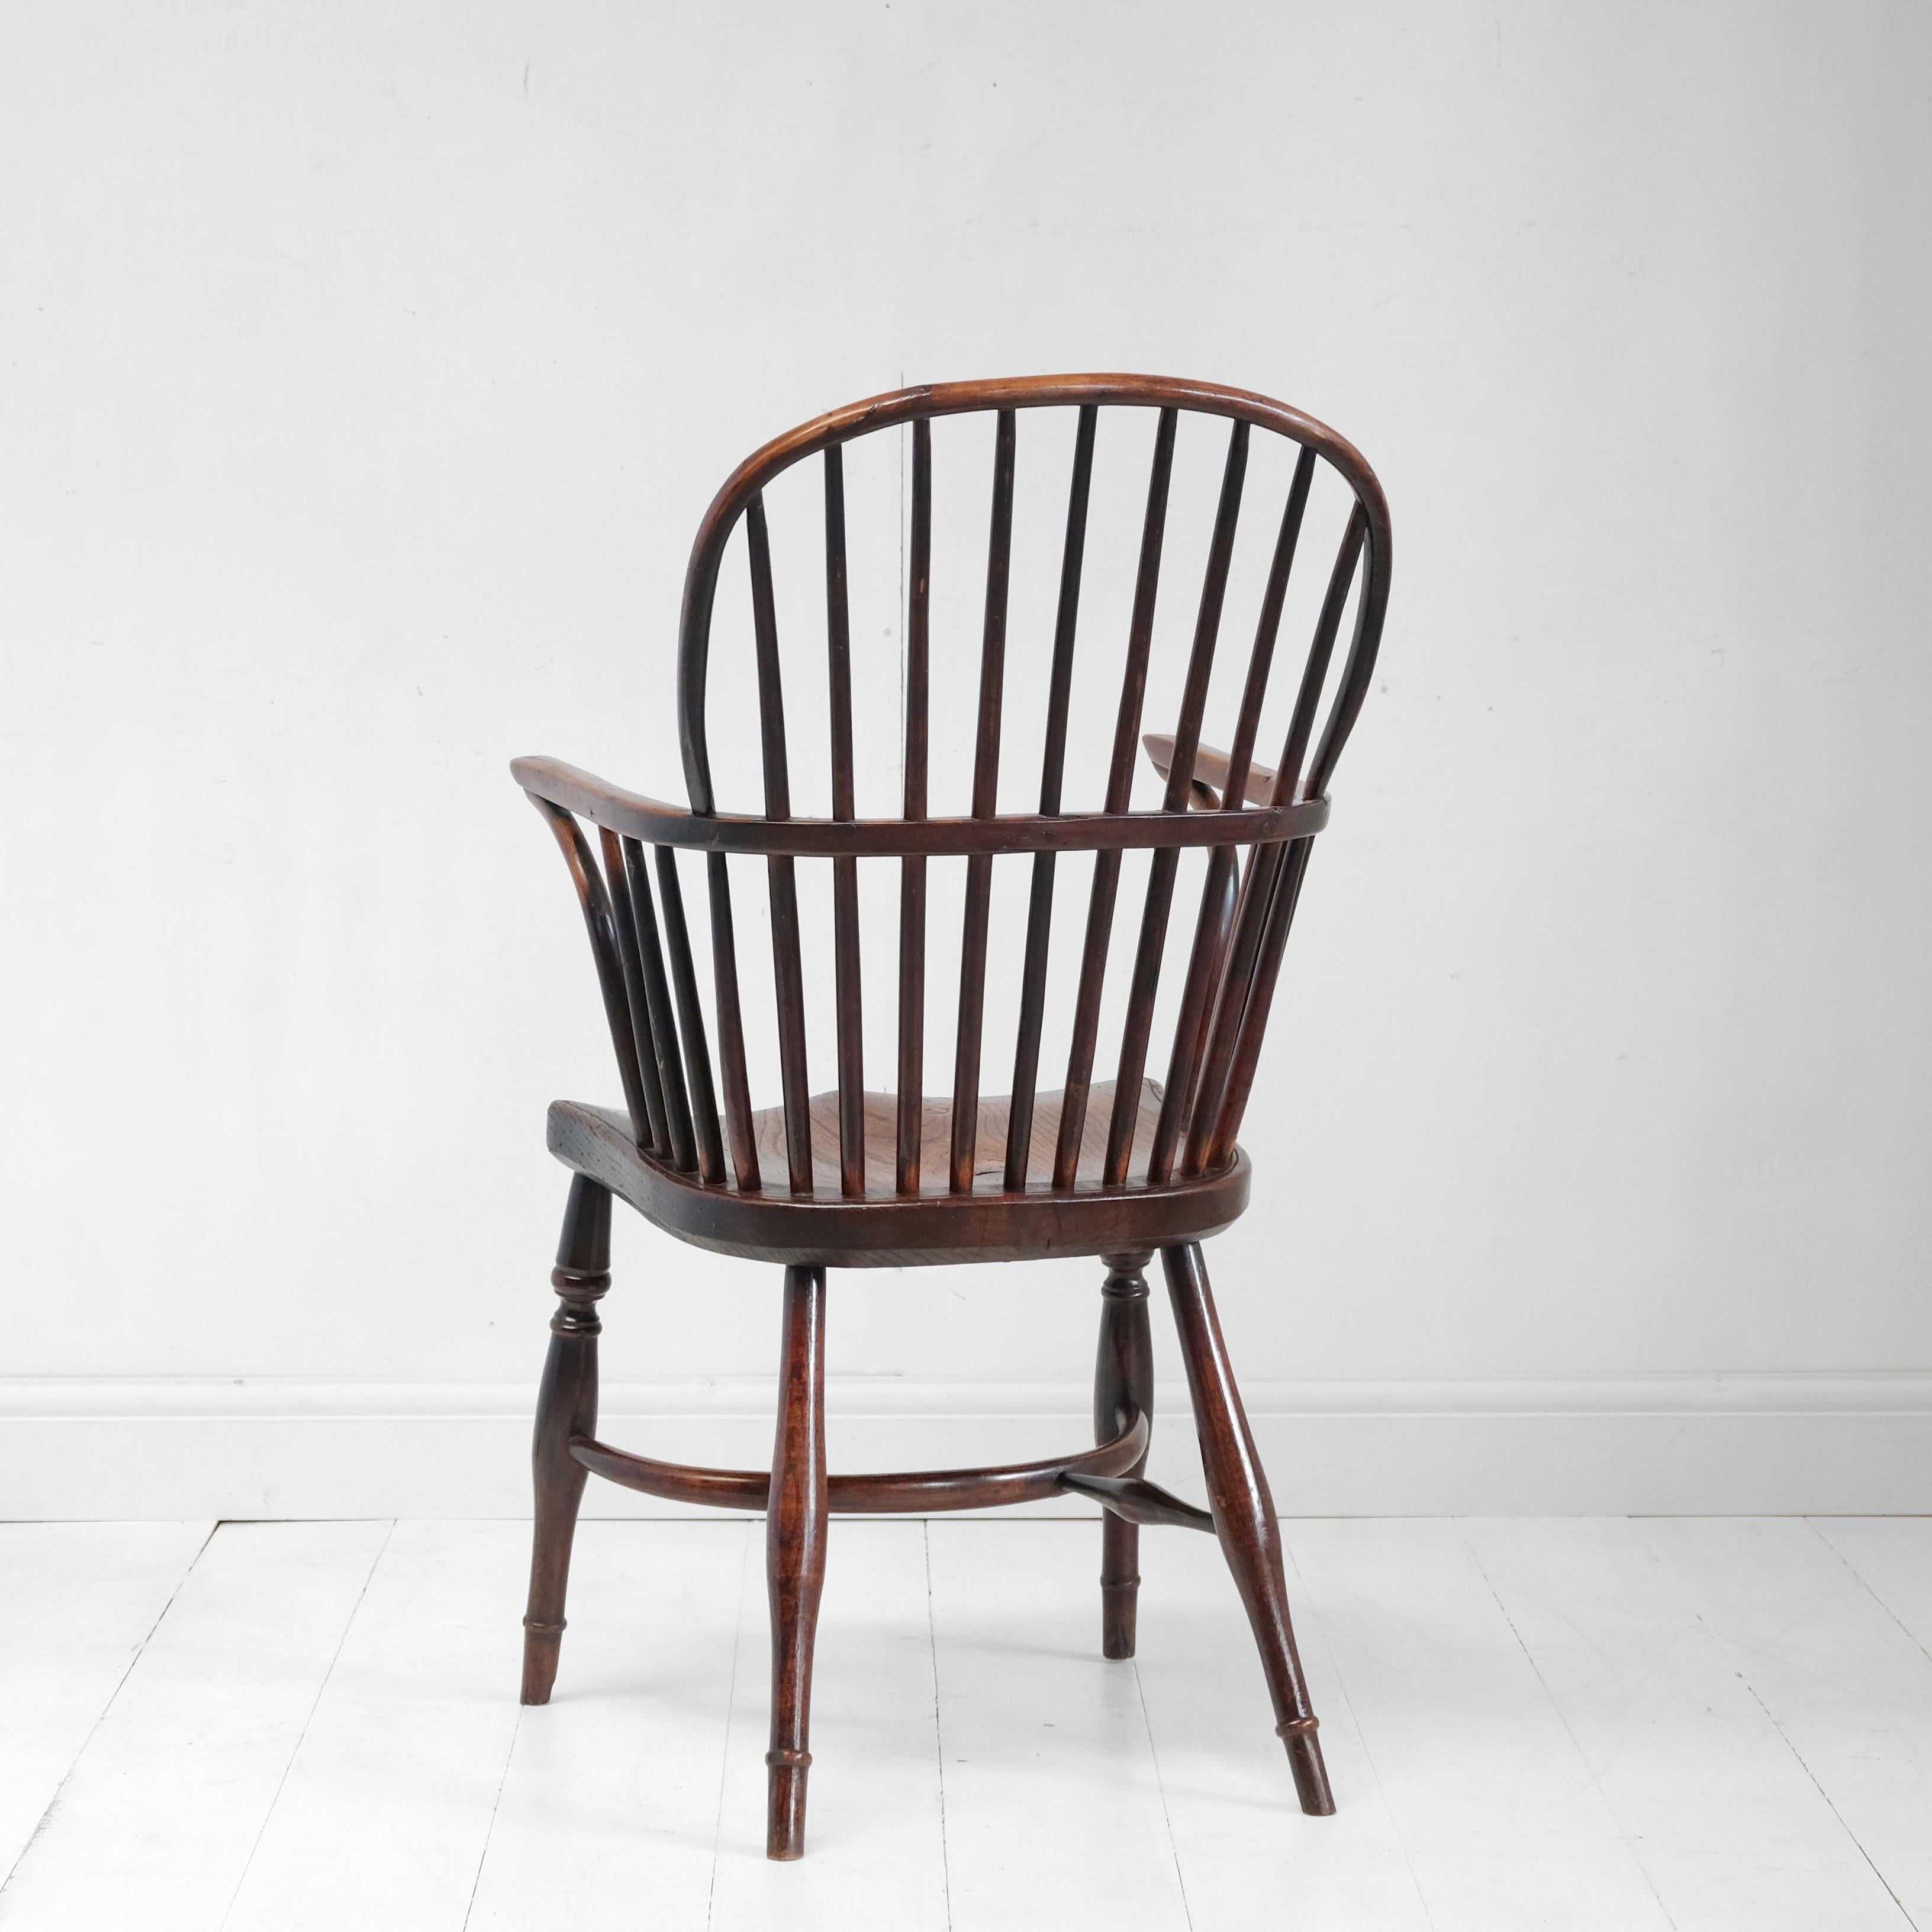 Country Yew Wood Stick Back, English Windsor Chair, 19th Century, Lincolnshire Hoop Back